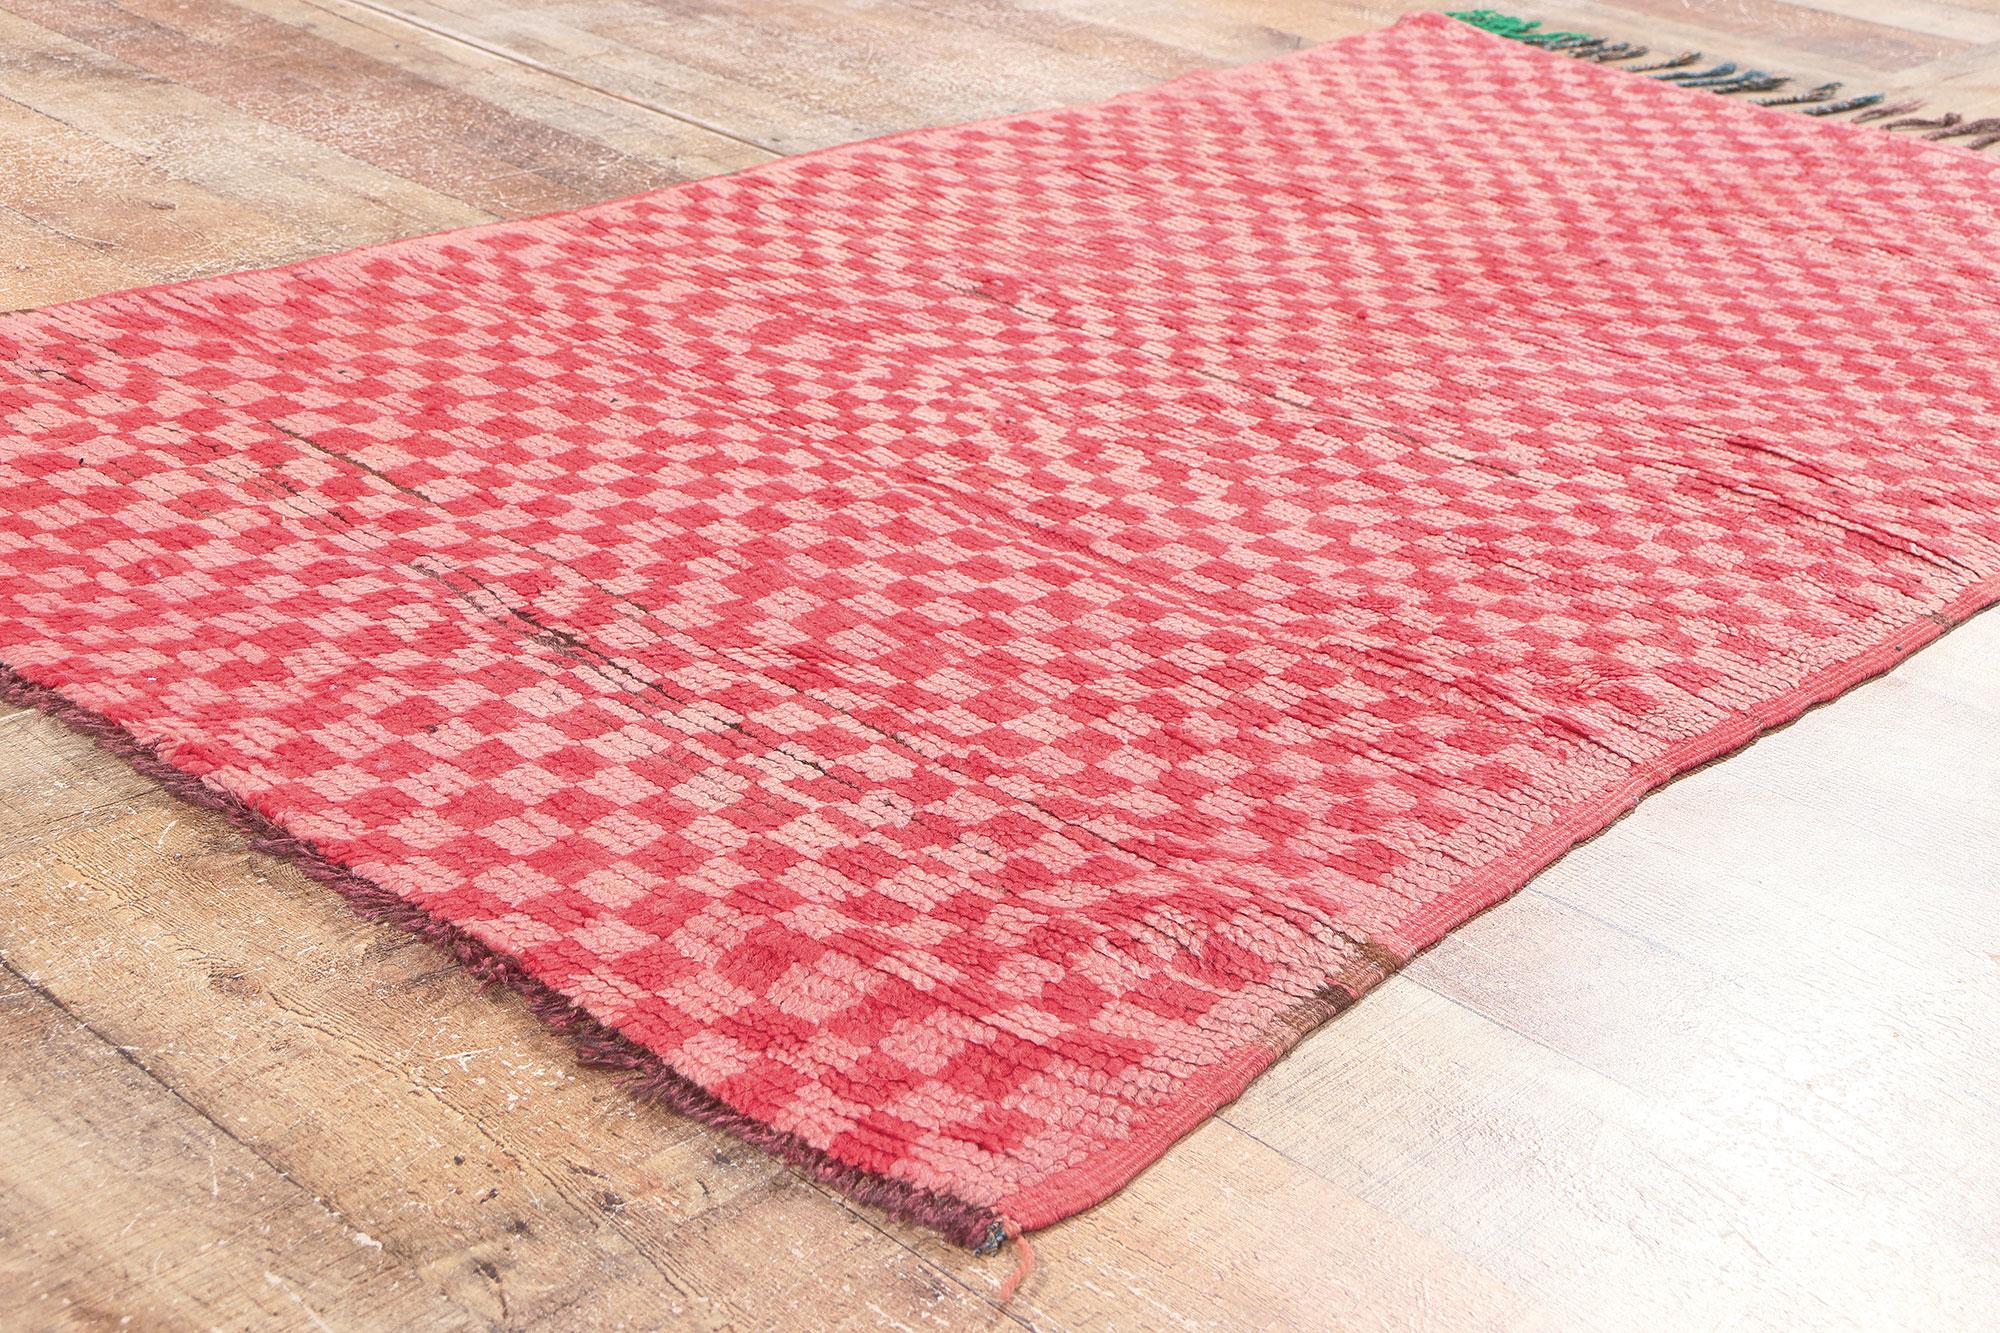 Vintage Boujad Checkered Moroccan Rug, Boho Chic Meets Midcentury Elegance In Good Condition For Sale In Dallas, TX